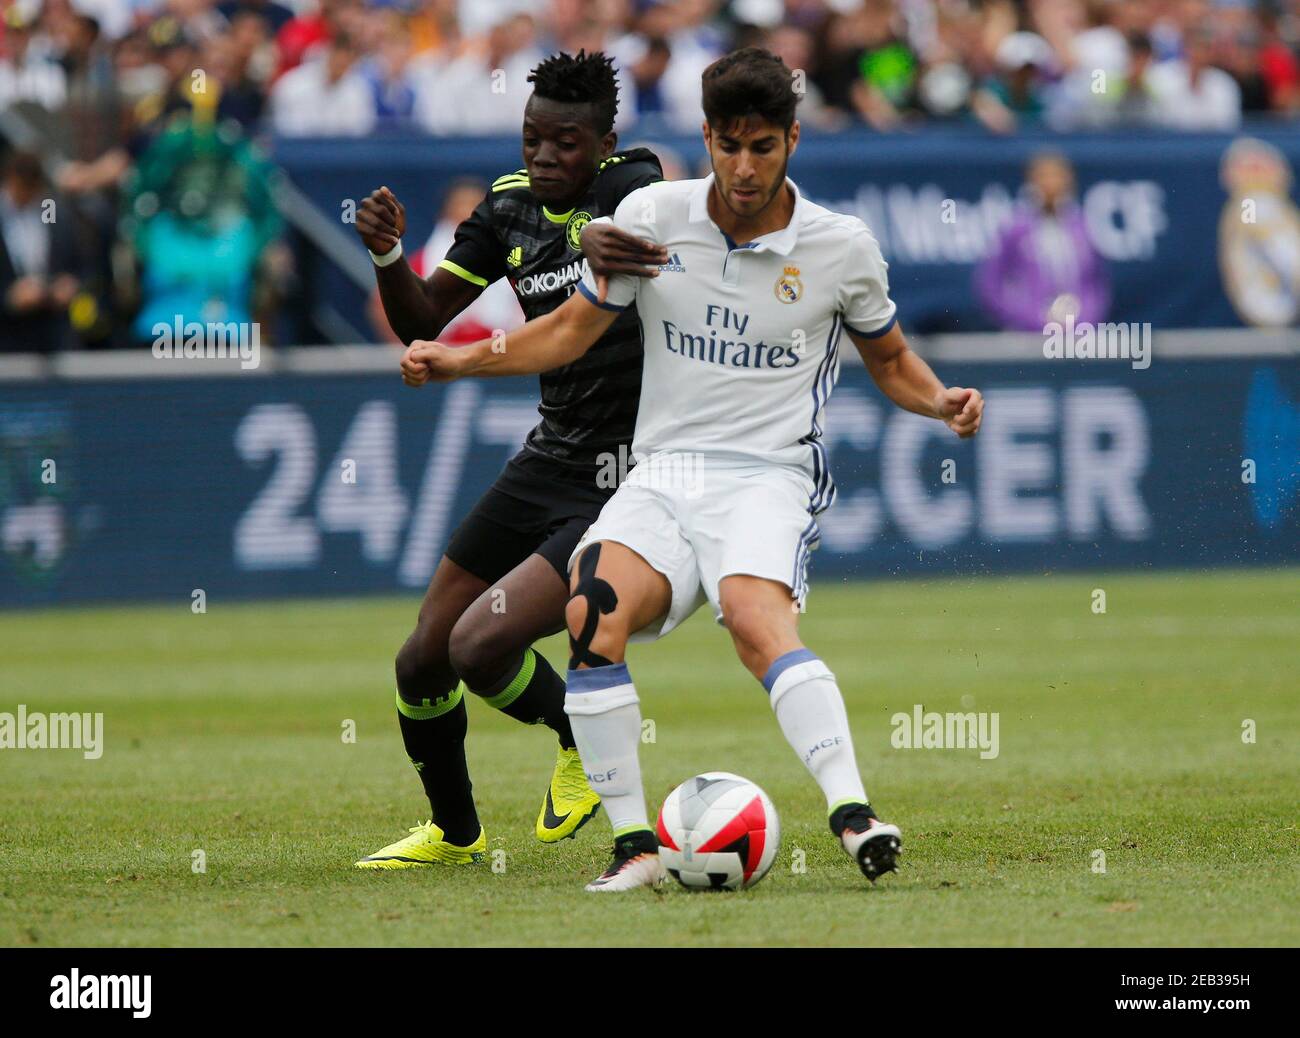 Football Soccer Real Madrid V Chelsea International Champions Cup Michigan Stadium Ann Arbor United States Of America 30 7 16 Real Madrid S Marco Asensio In Action With Chelsea S Bertrand Traore